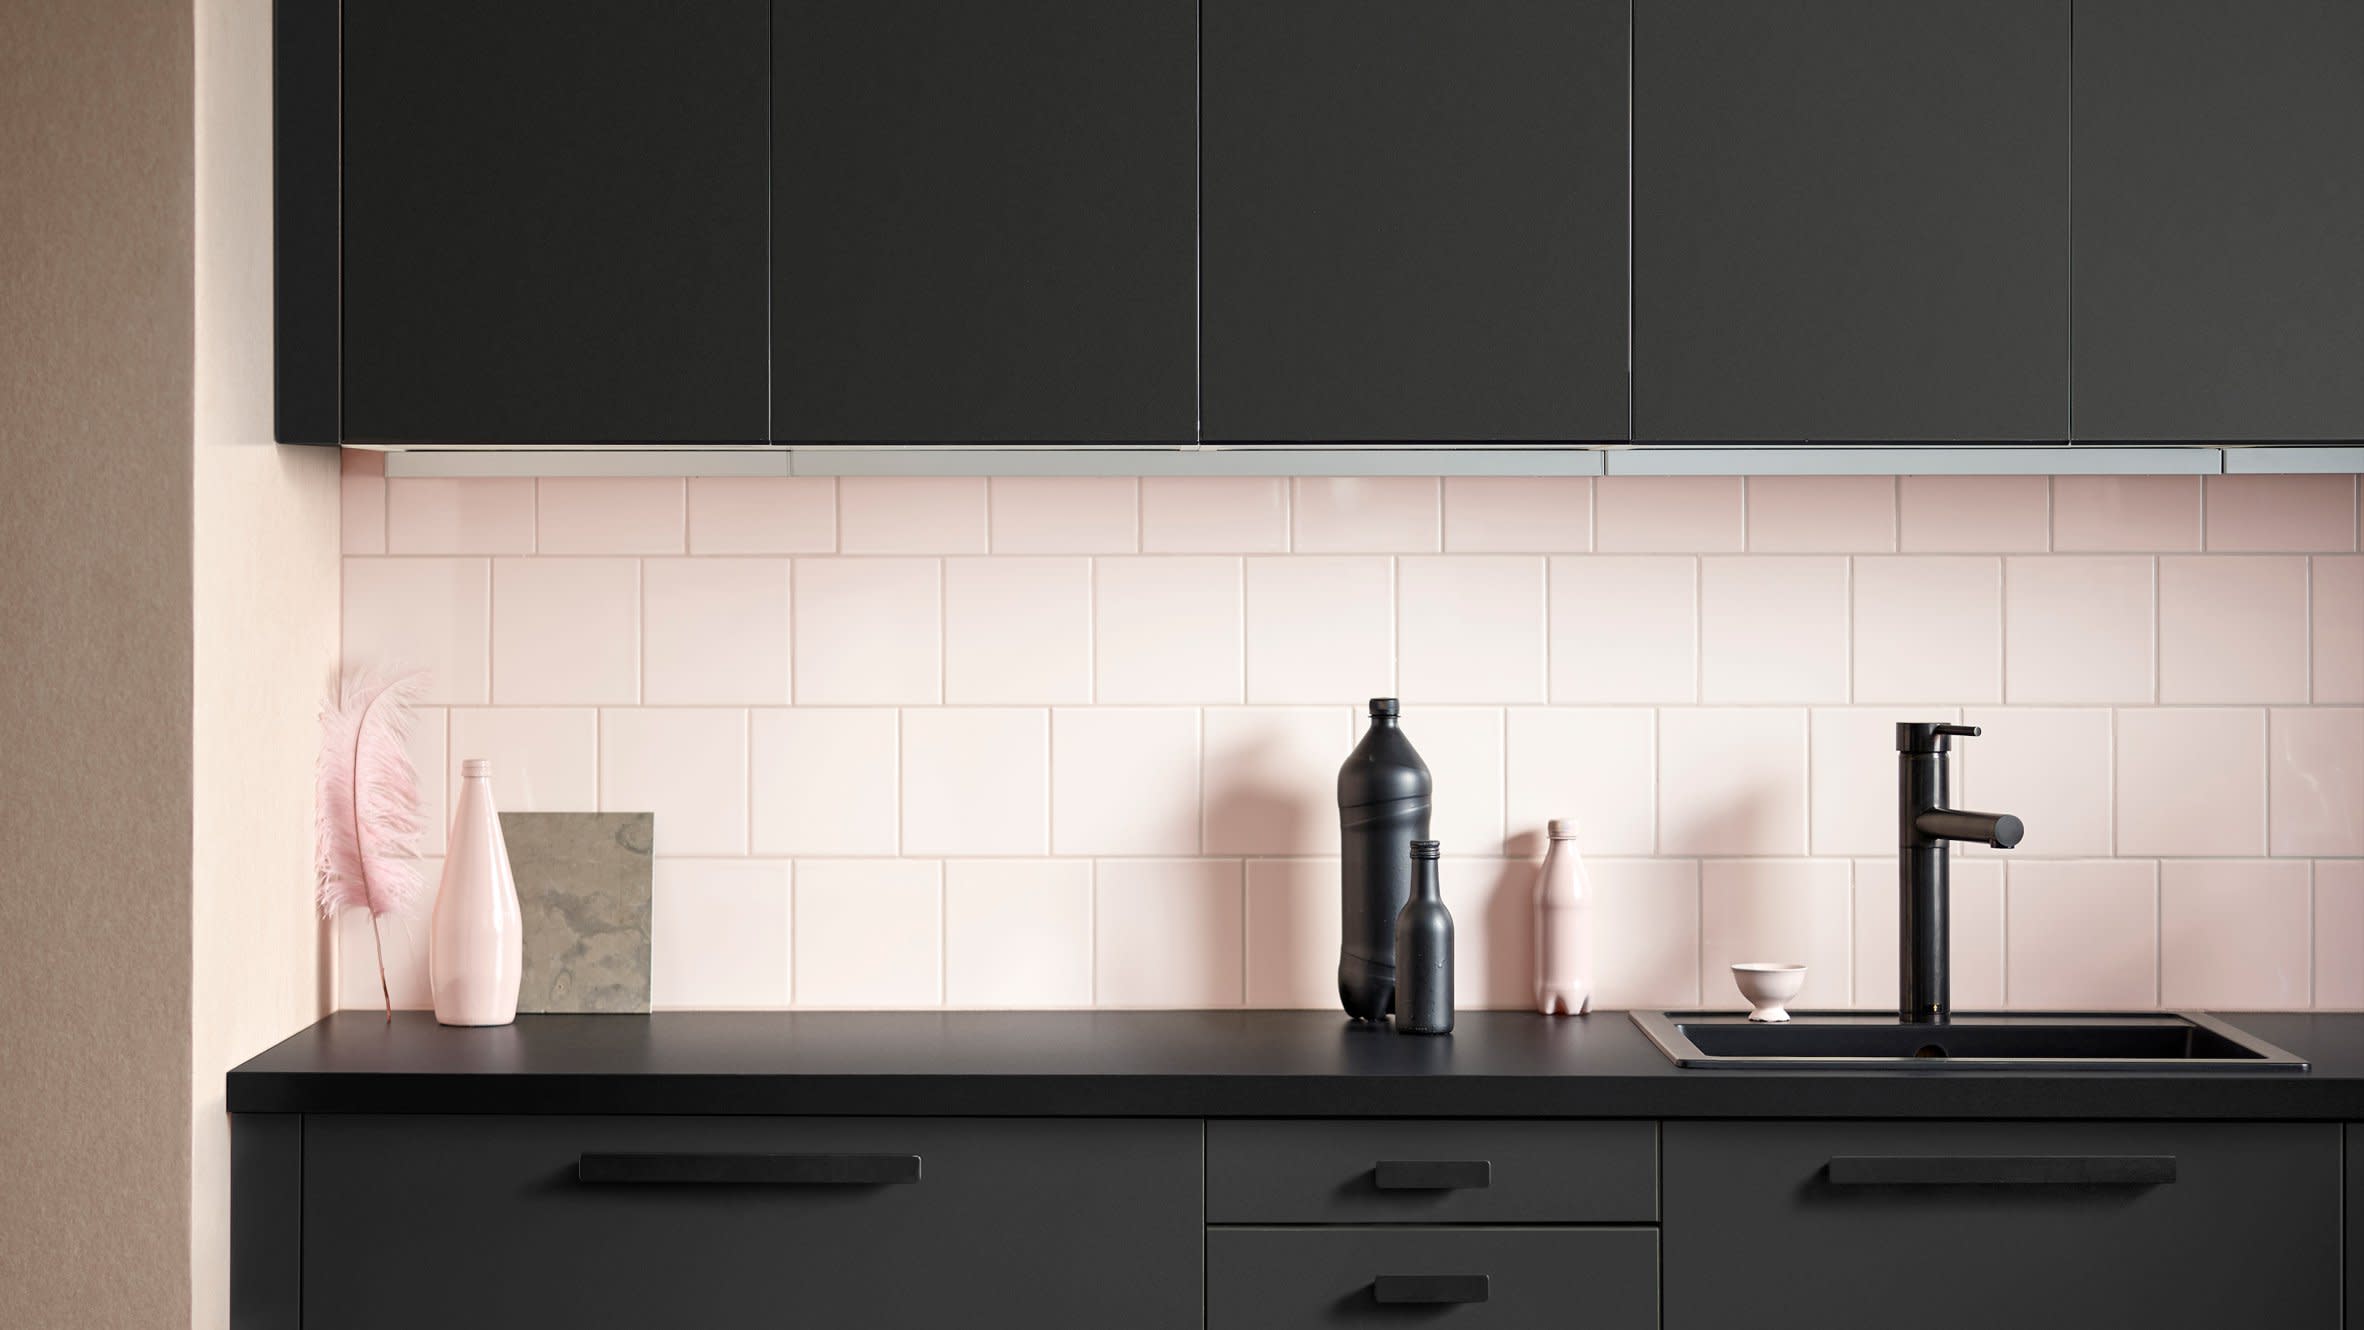 Ikea S New Kitchen Cabinets Are Made From Recycled Bottles Apartment Therapy